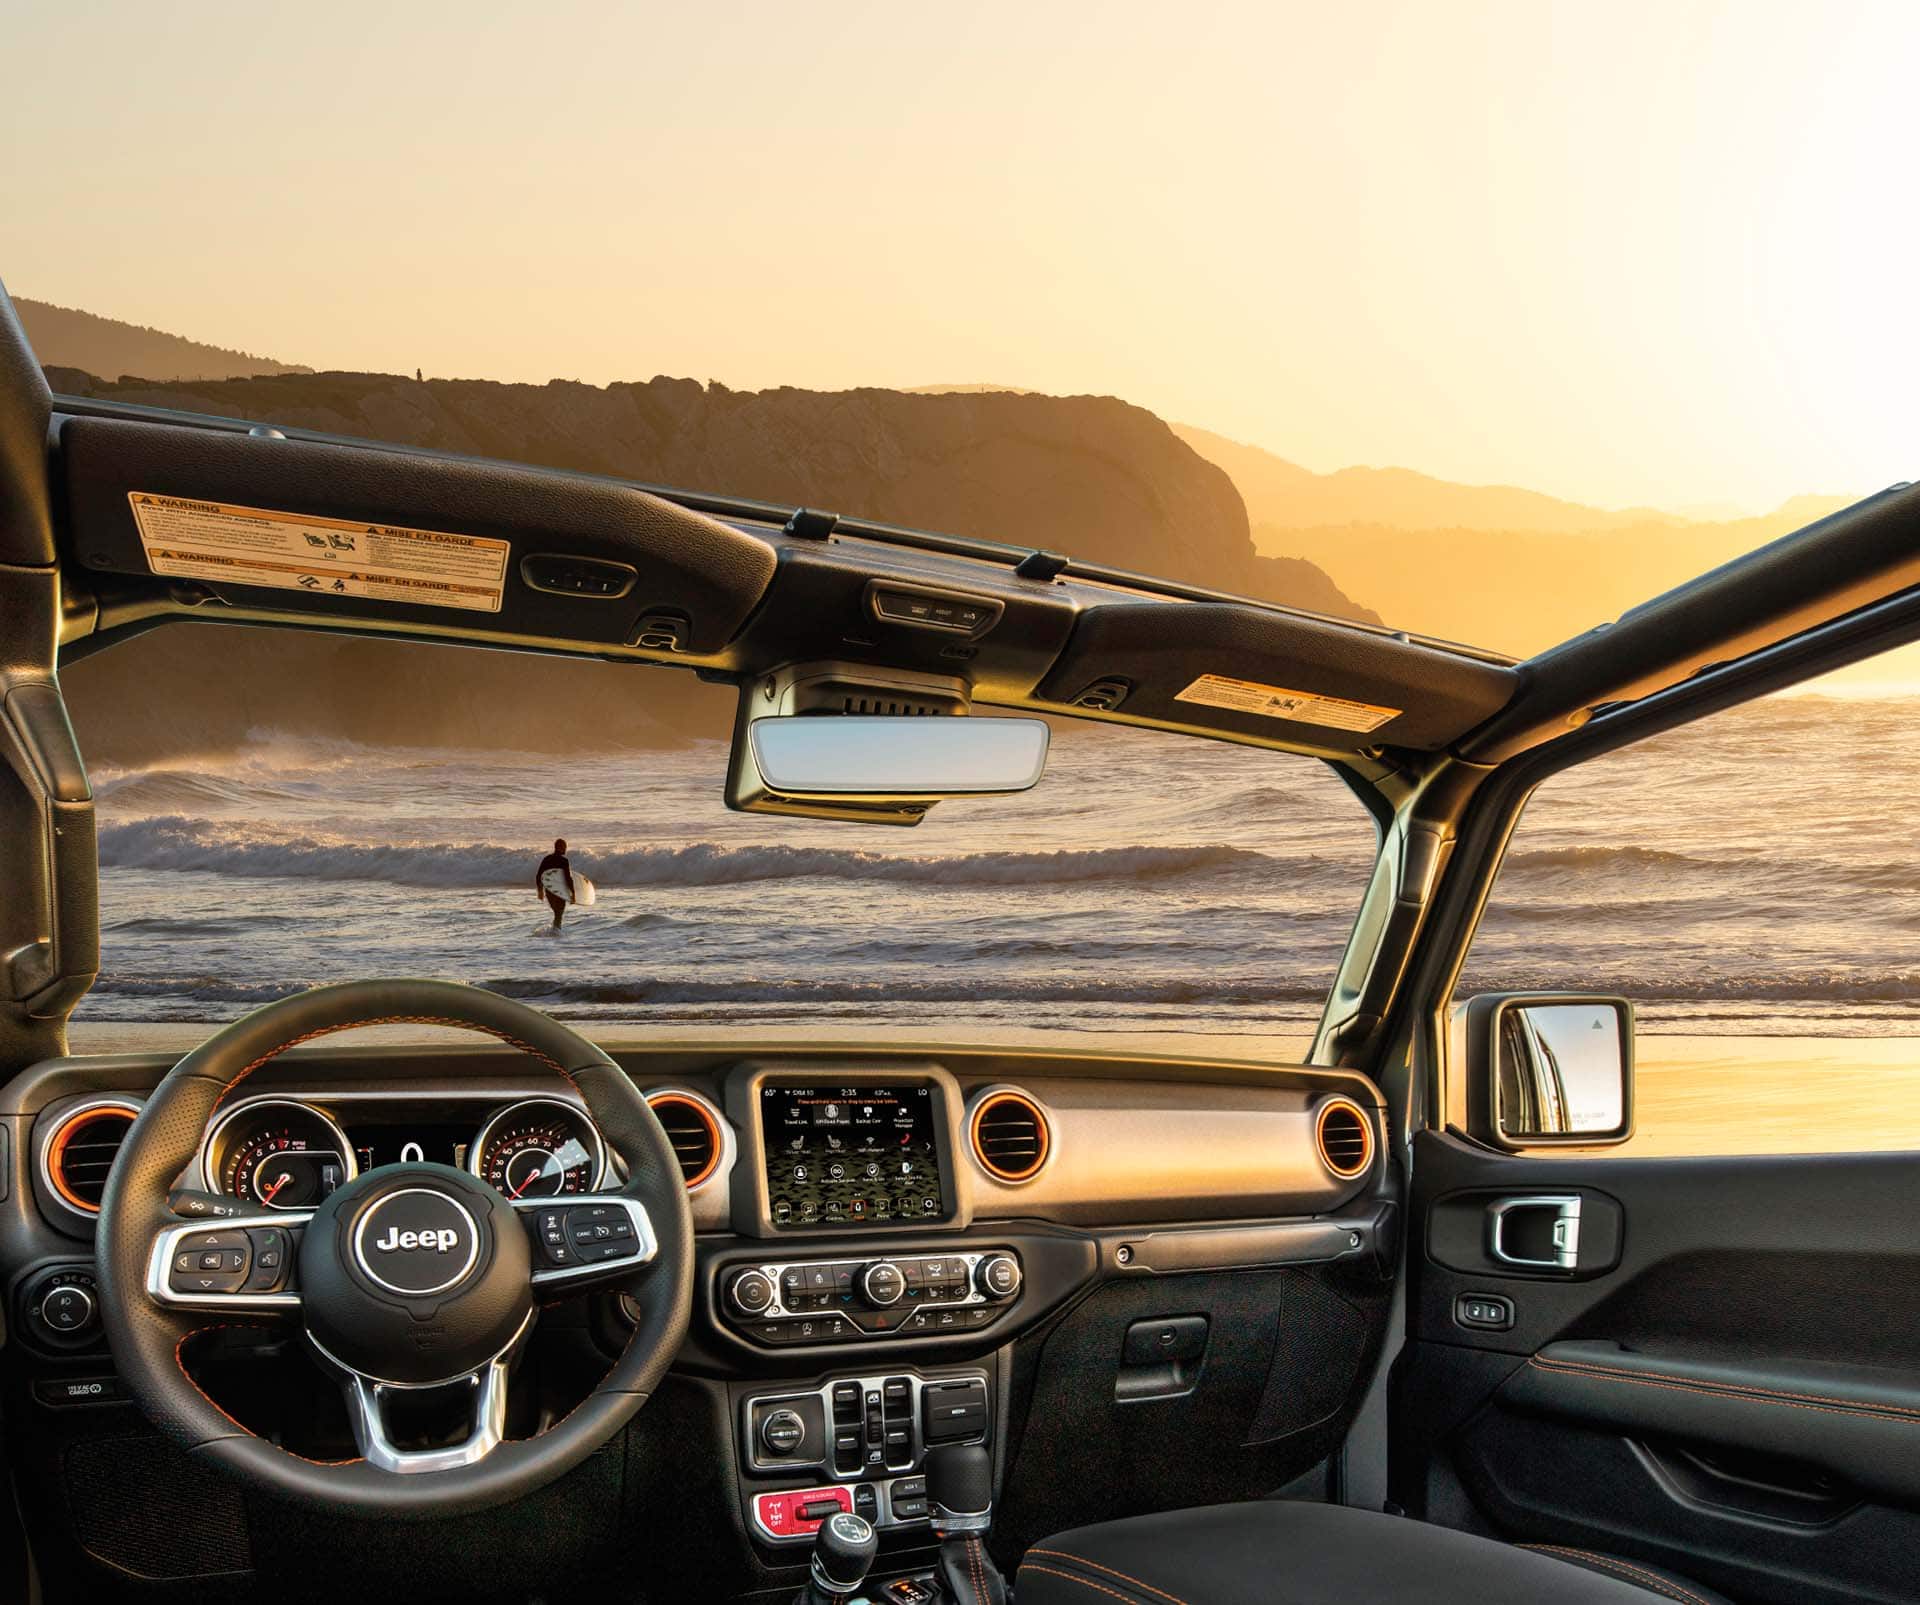 The interior of the 2023 Jeep Gladiator Mojave with its top off, focusing on the ocean and sky visible through the windshield, open roof and open window.